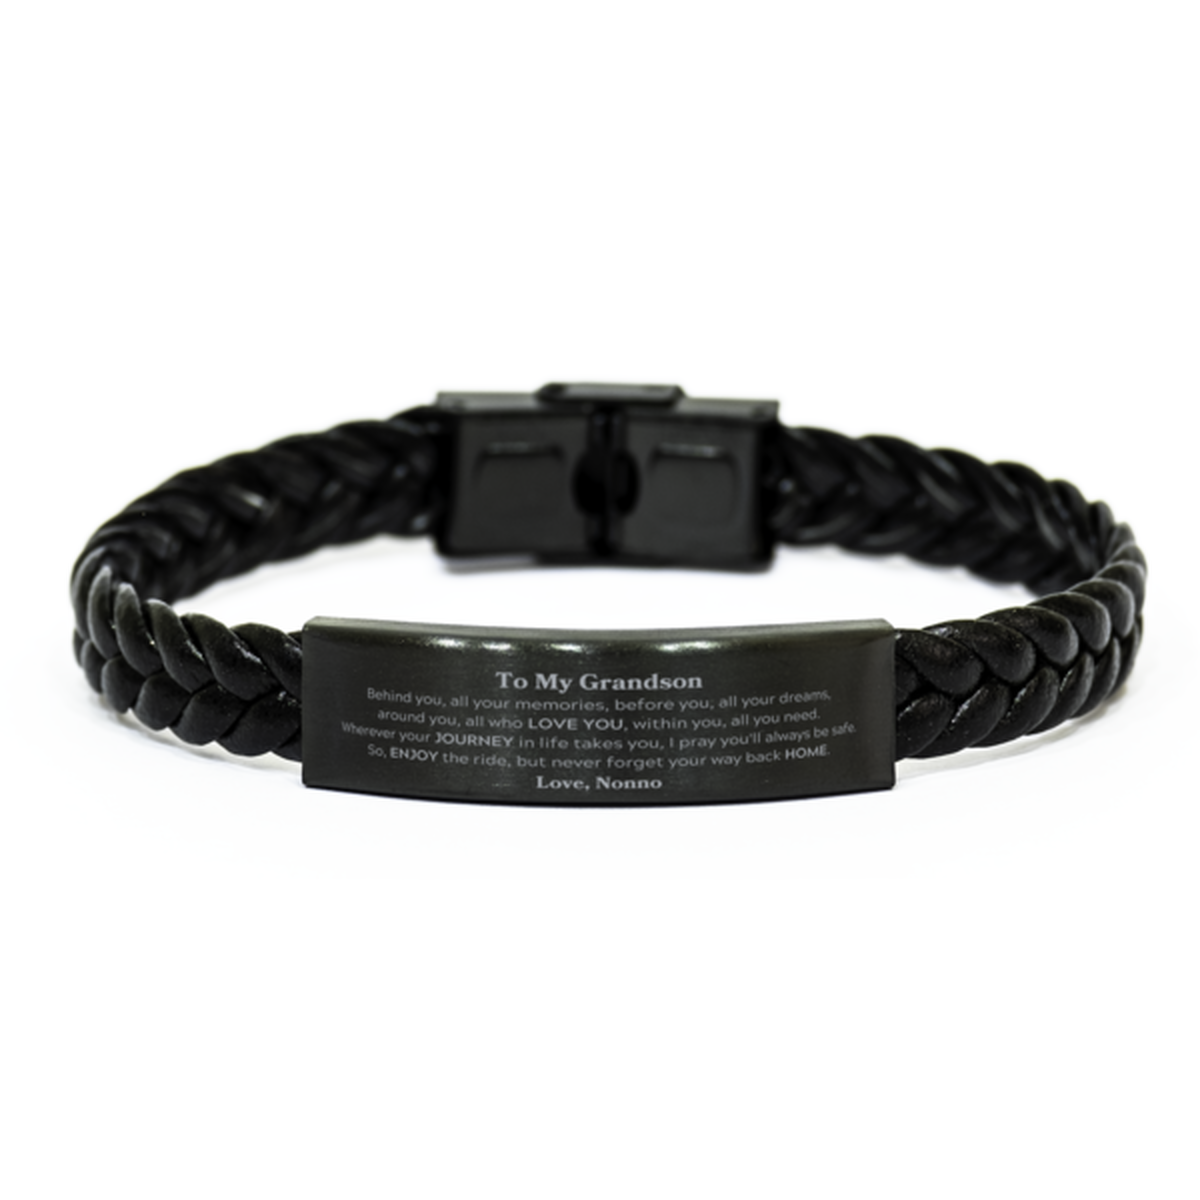 To My Grandson Graduation Gifts from Nonno, Grandson Braided Leather Bracelet Christmas Birthday Gifts for Grandson Behind you, all your memories, before you, all your dreams. Love, Nonno